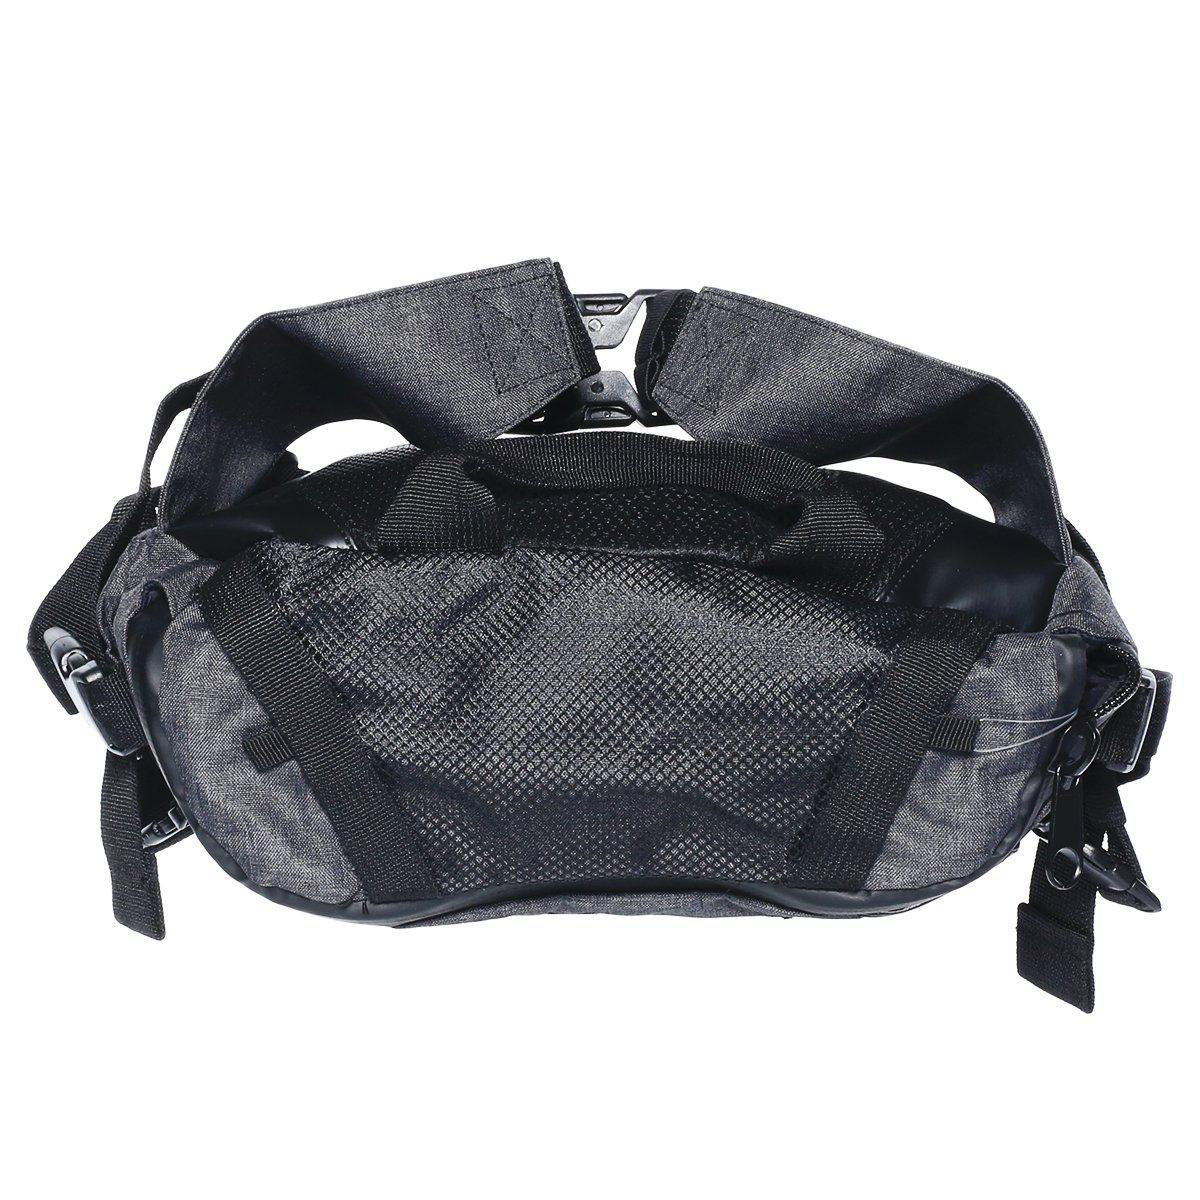 odor proof fanny pack